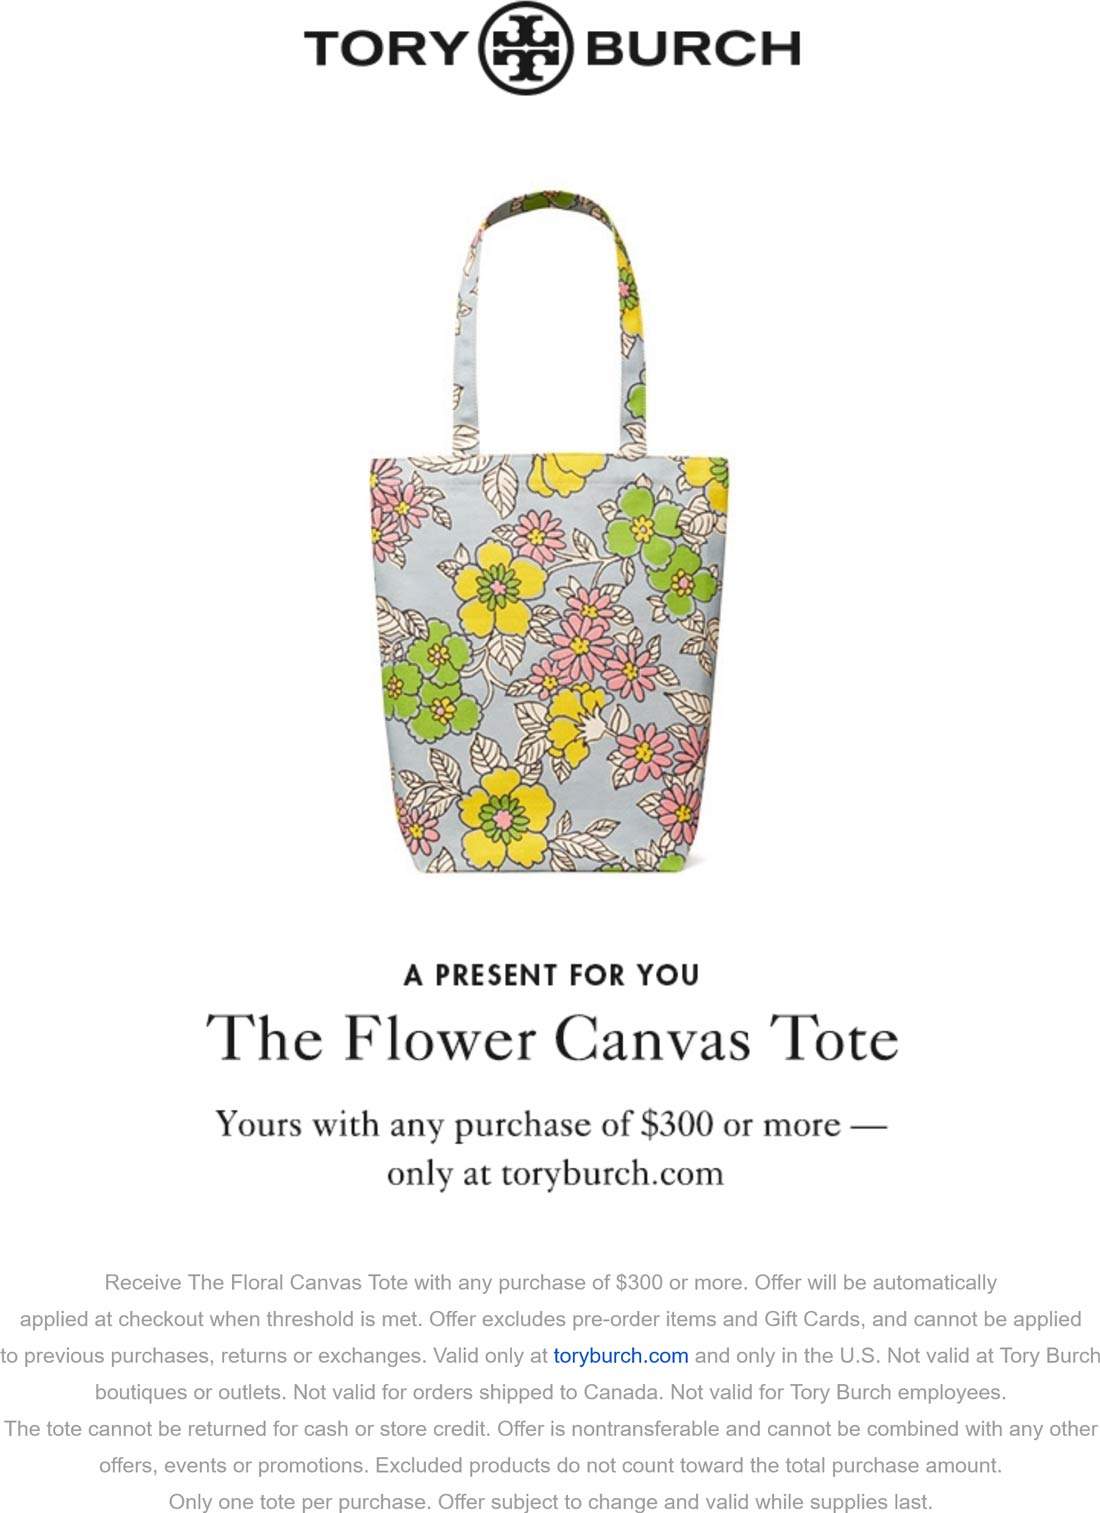 Tory Burch stores Coupon  Free canvas tote with $300 spent online at Tory Burch #toryburch 